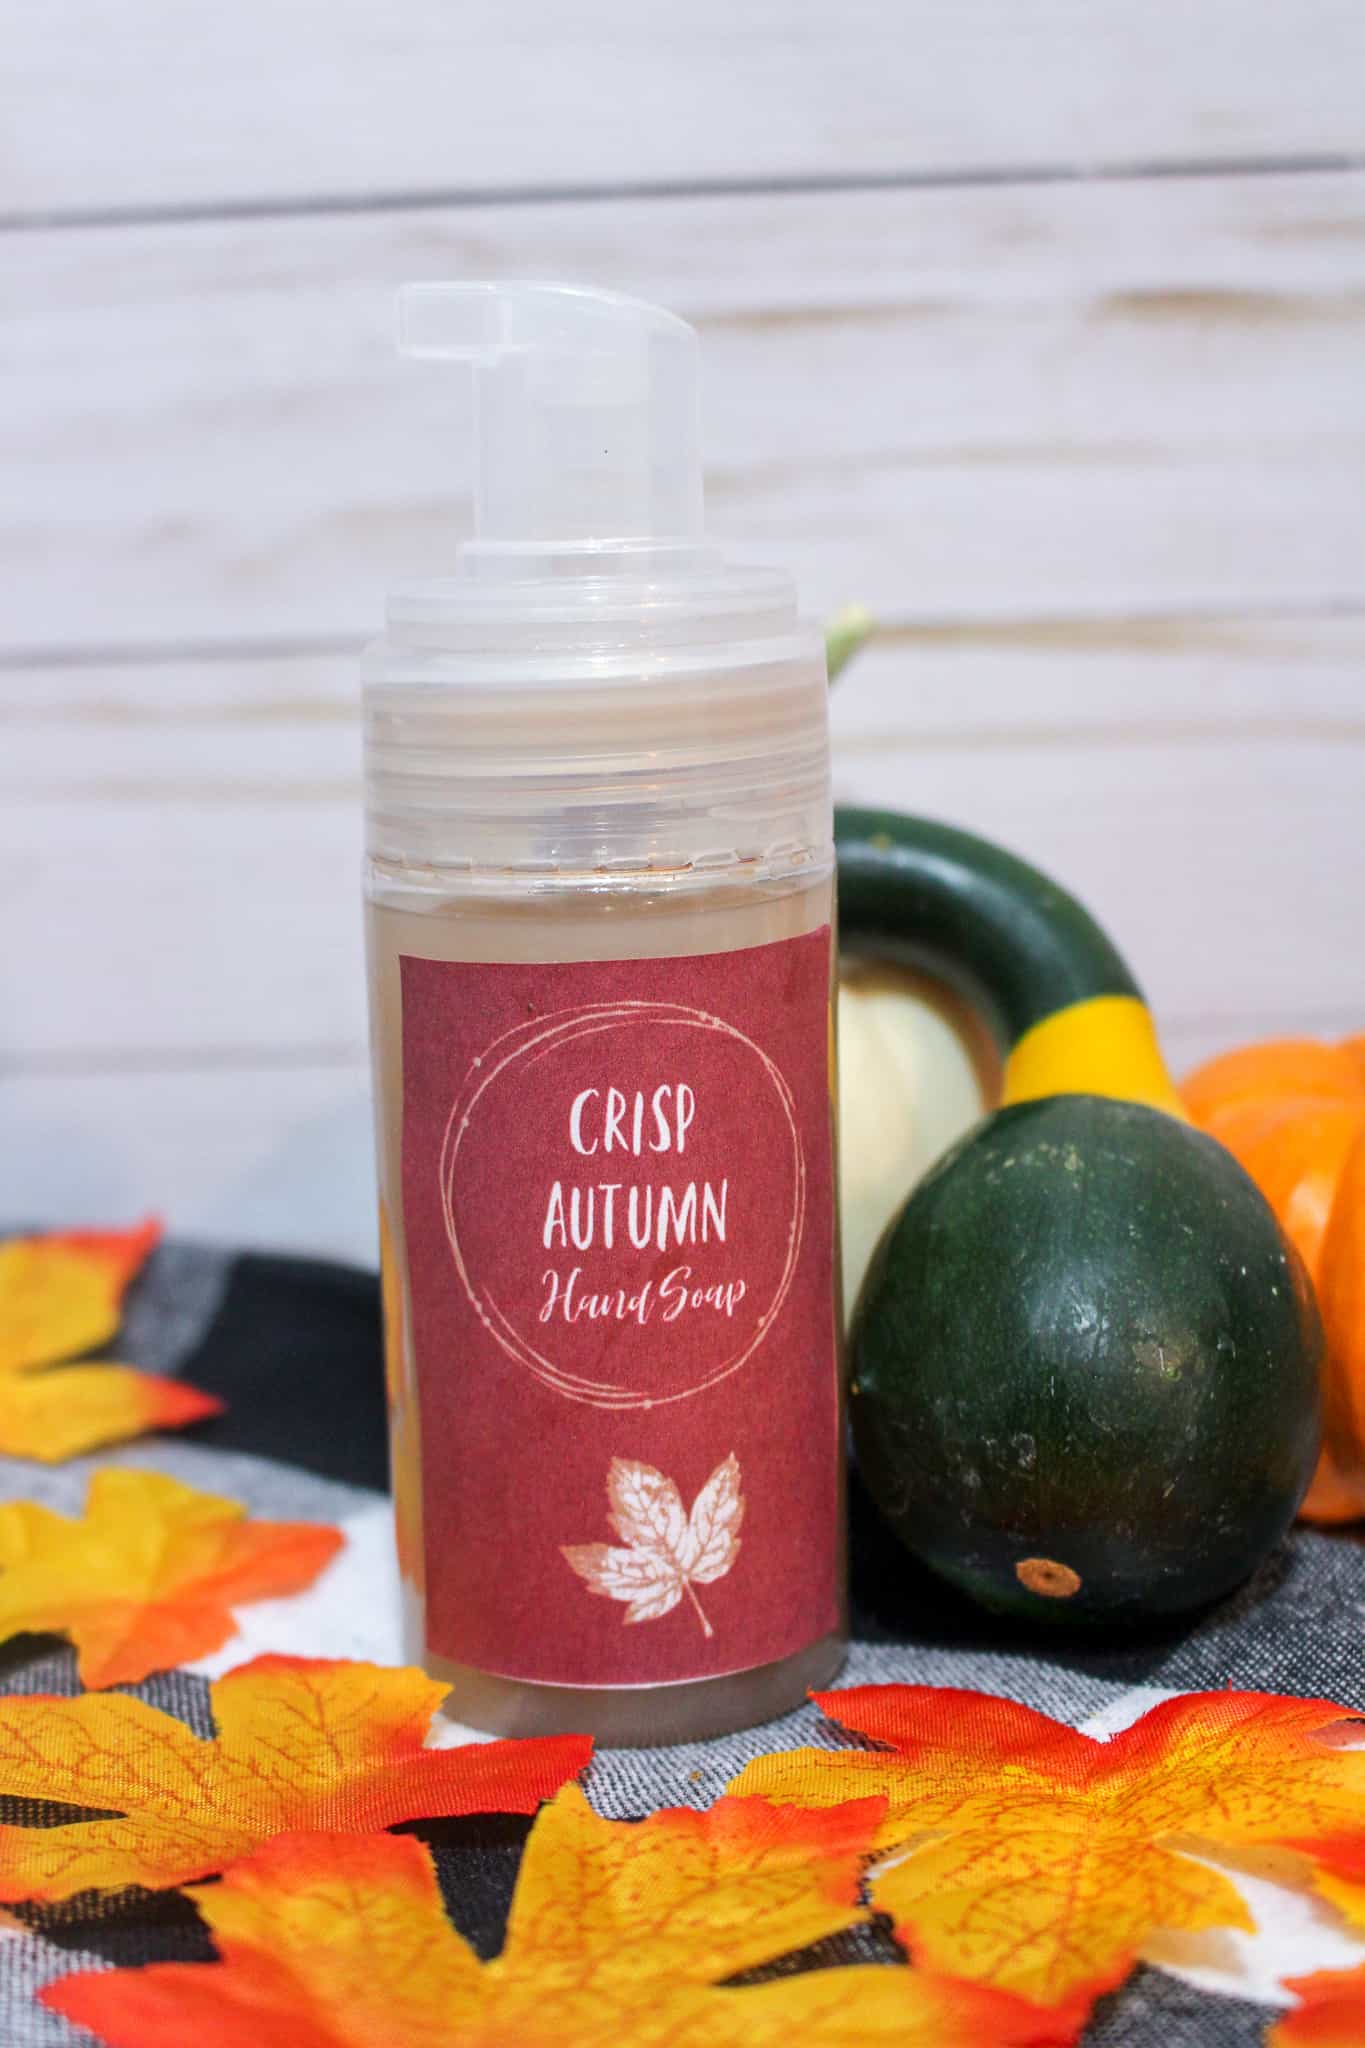 Make your own foaming hand soap with this easy recipe! It's much more affordable, takes very few ingredients, and can be completely customized! This is a beautiful crisp autumn scent! Grab free printable labels for your DIY foaming hand soap as well! #diy #foaminghandsoap #soaprecipe #diybeauty